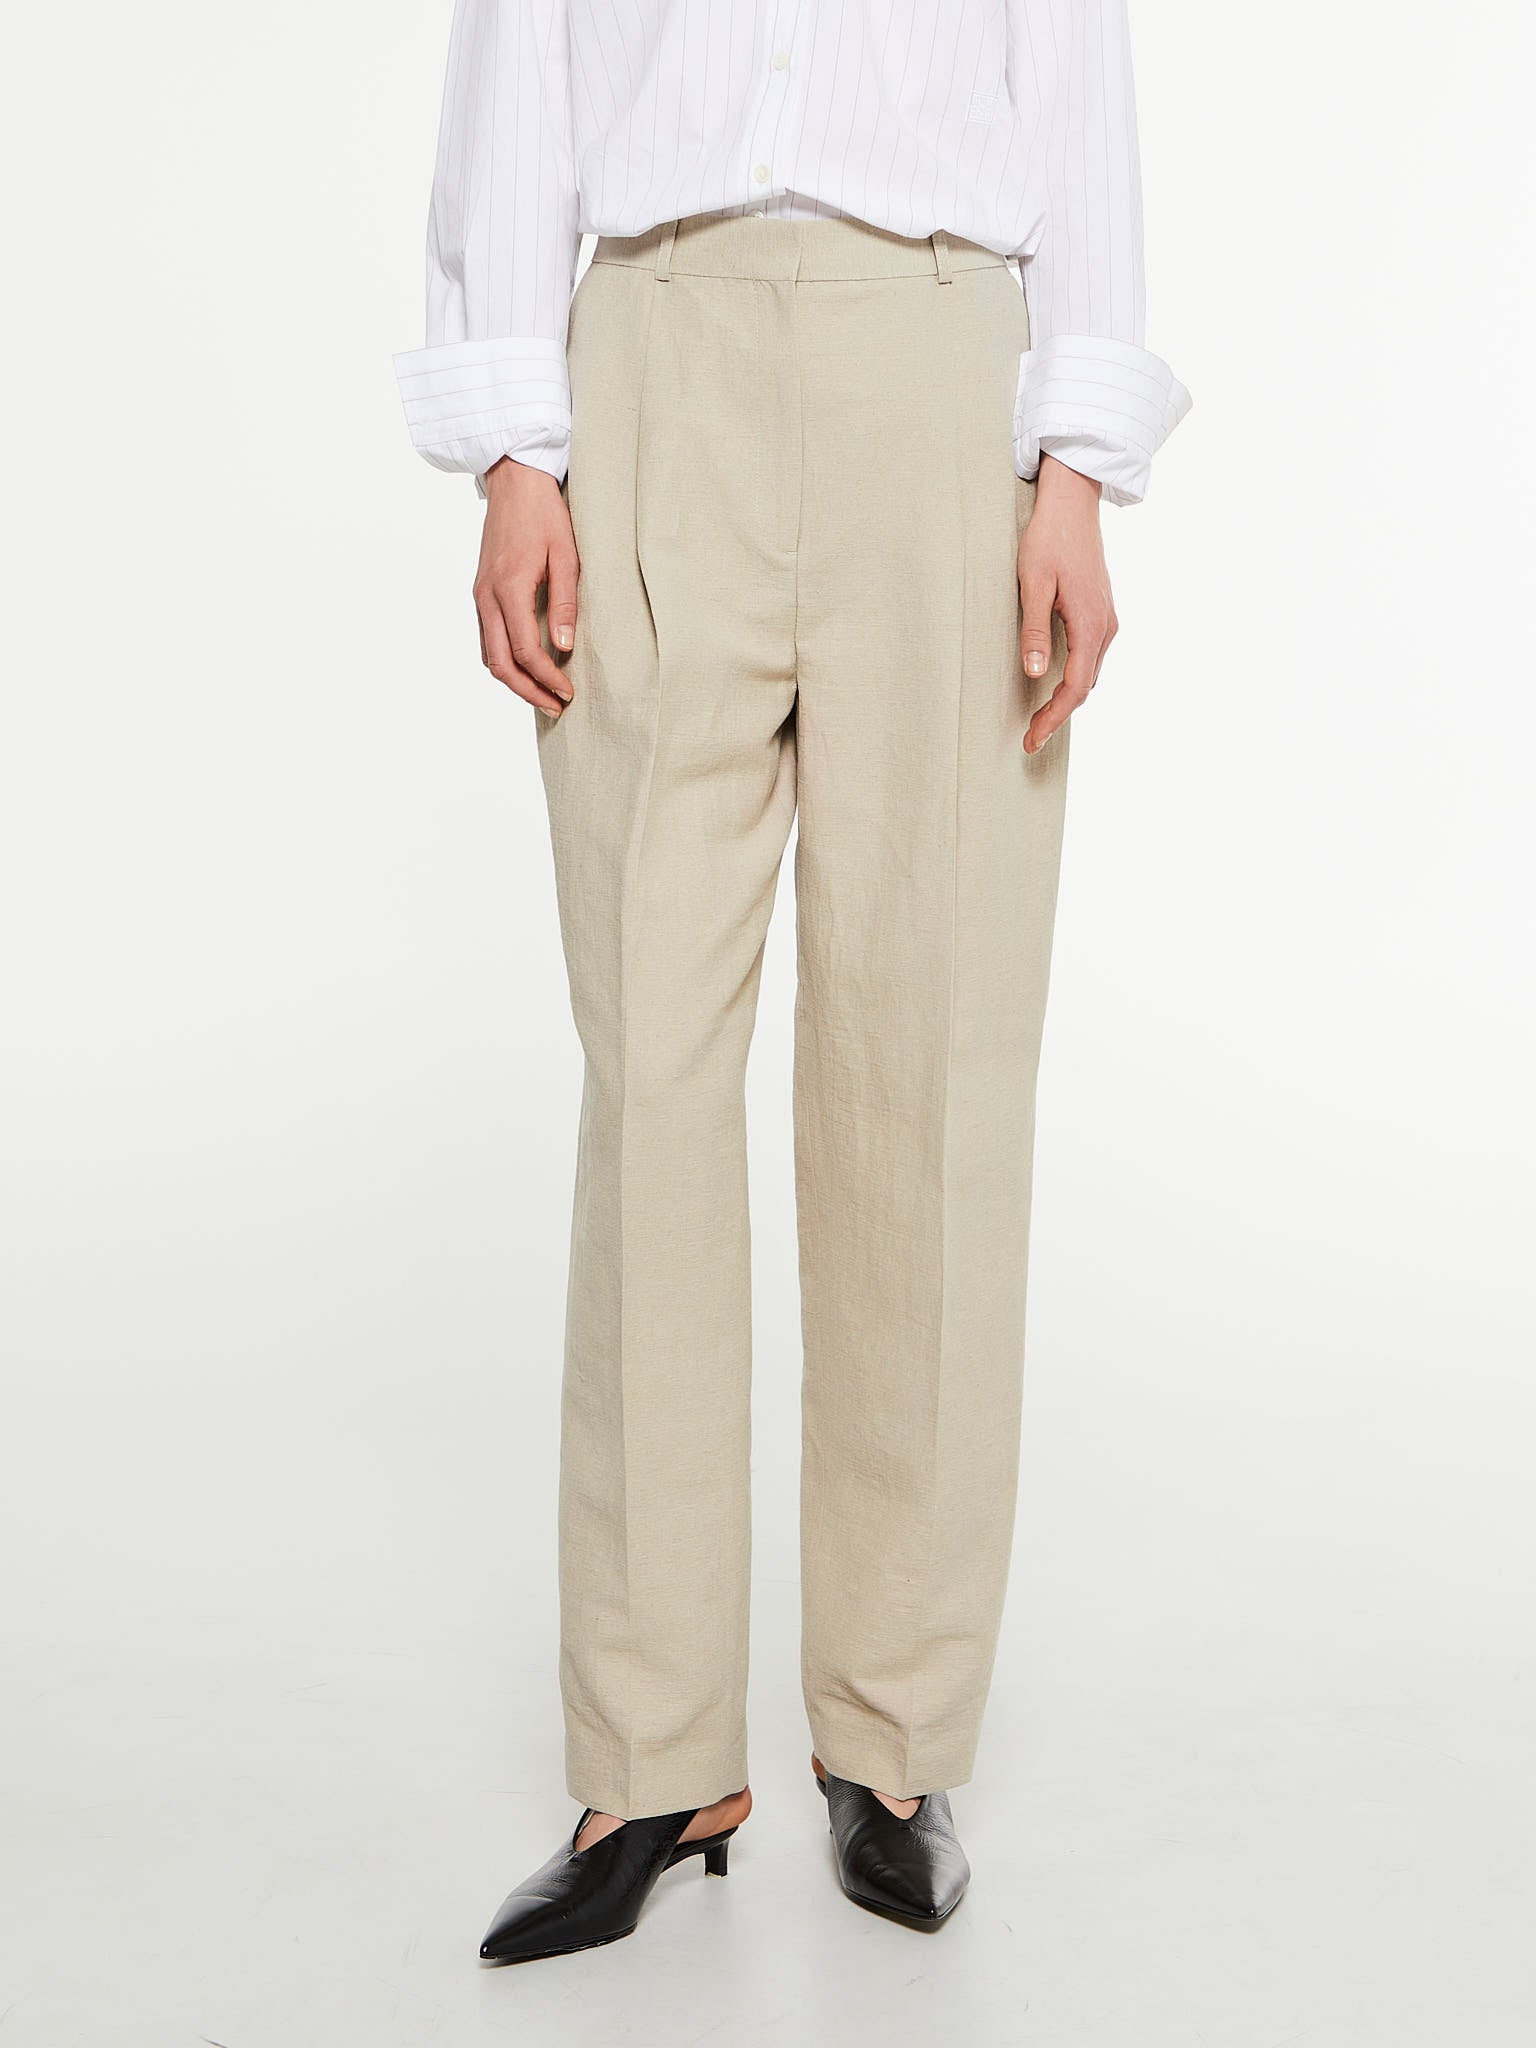 Double-Pleated Tailored Trousers in Sand